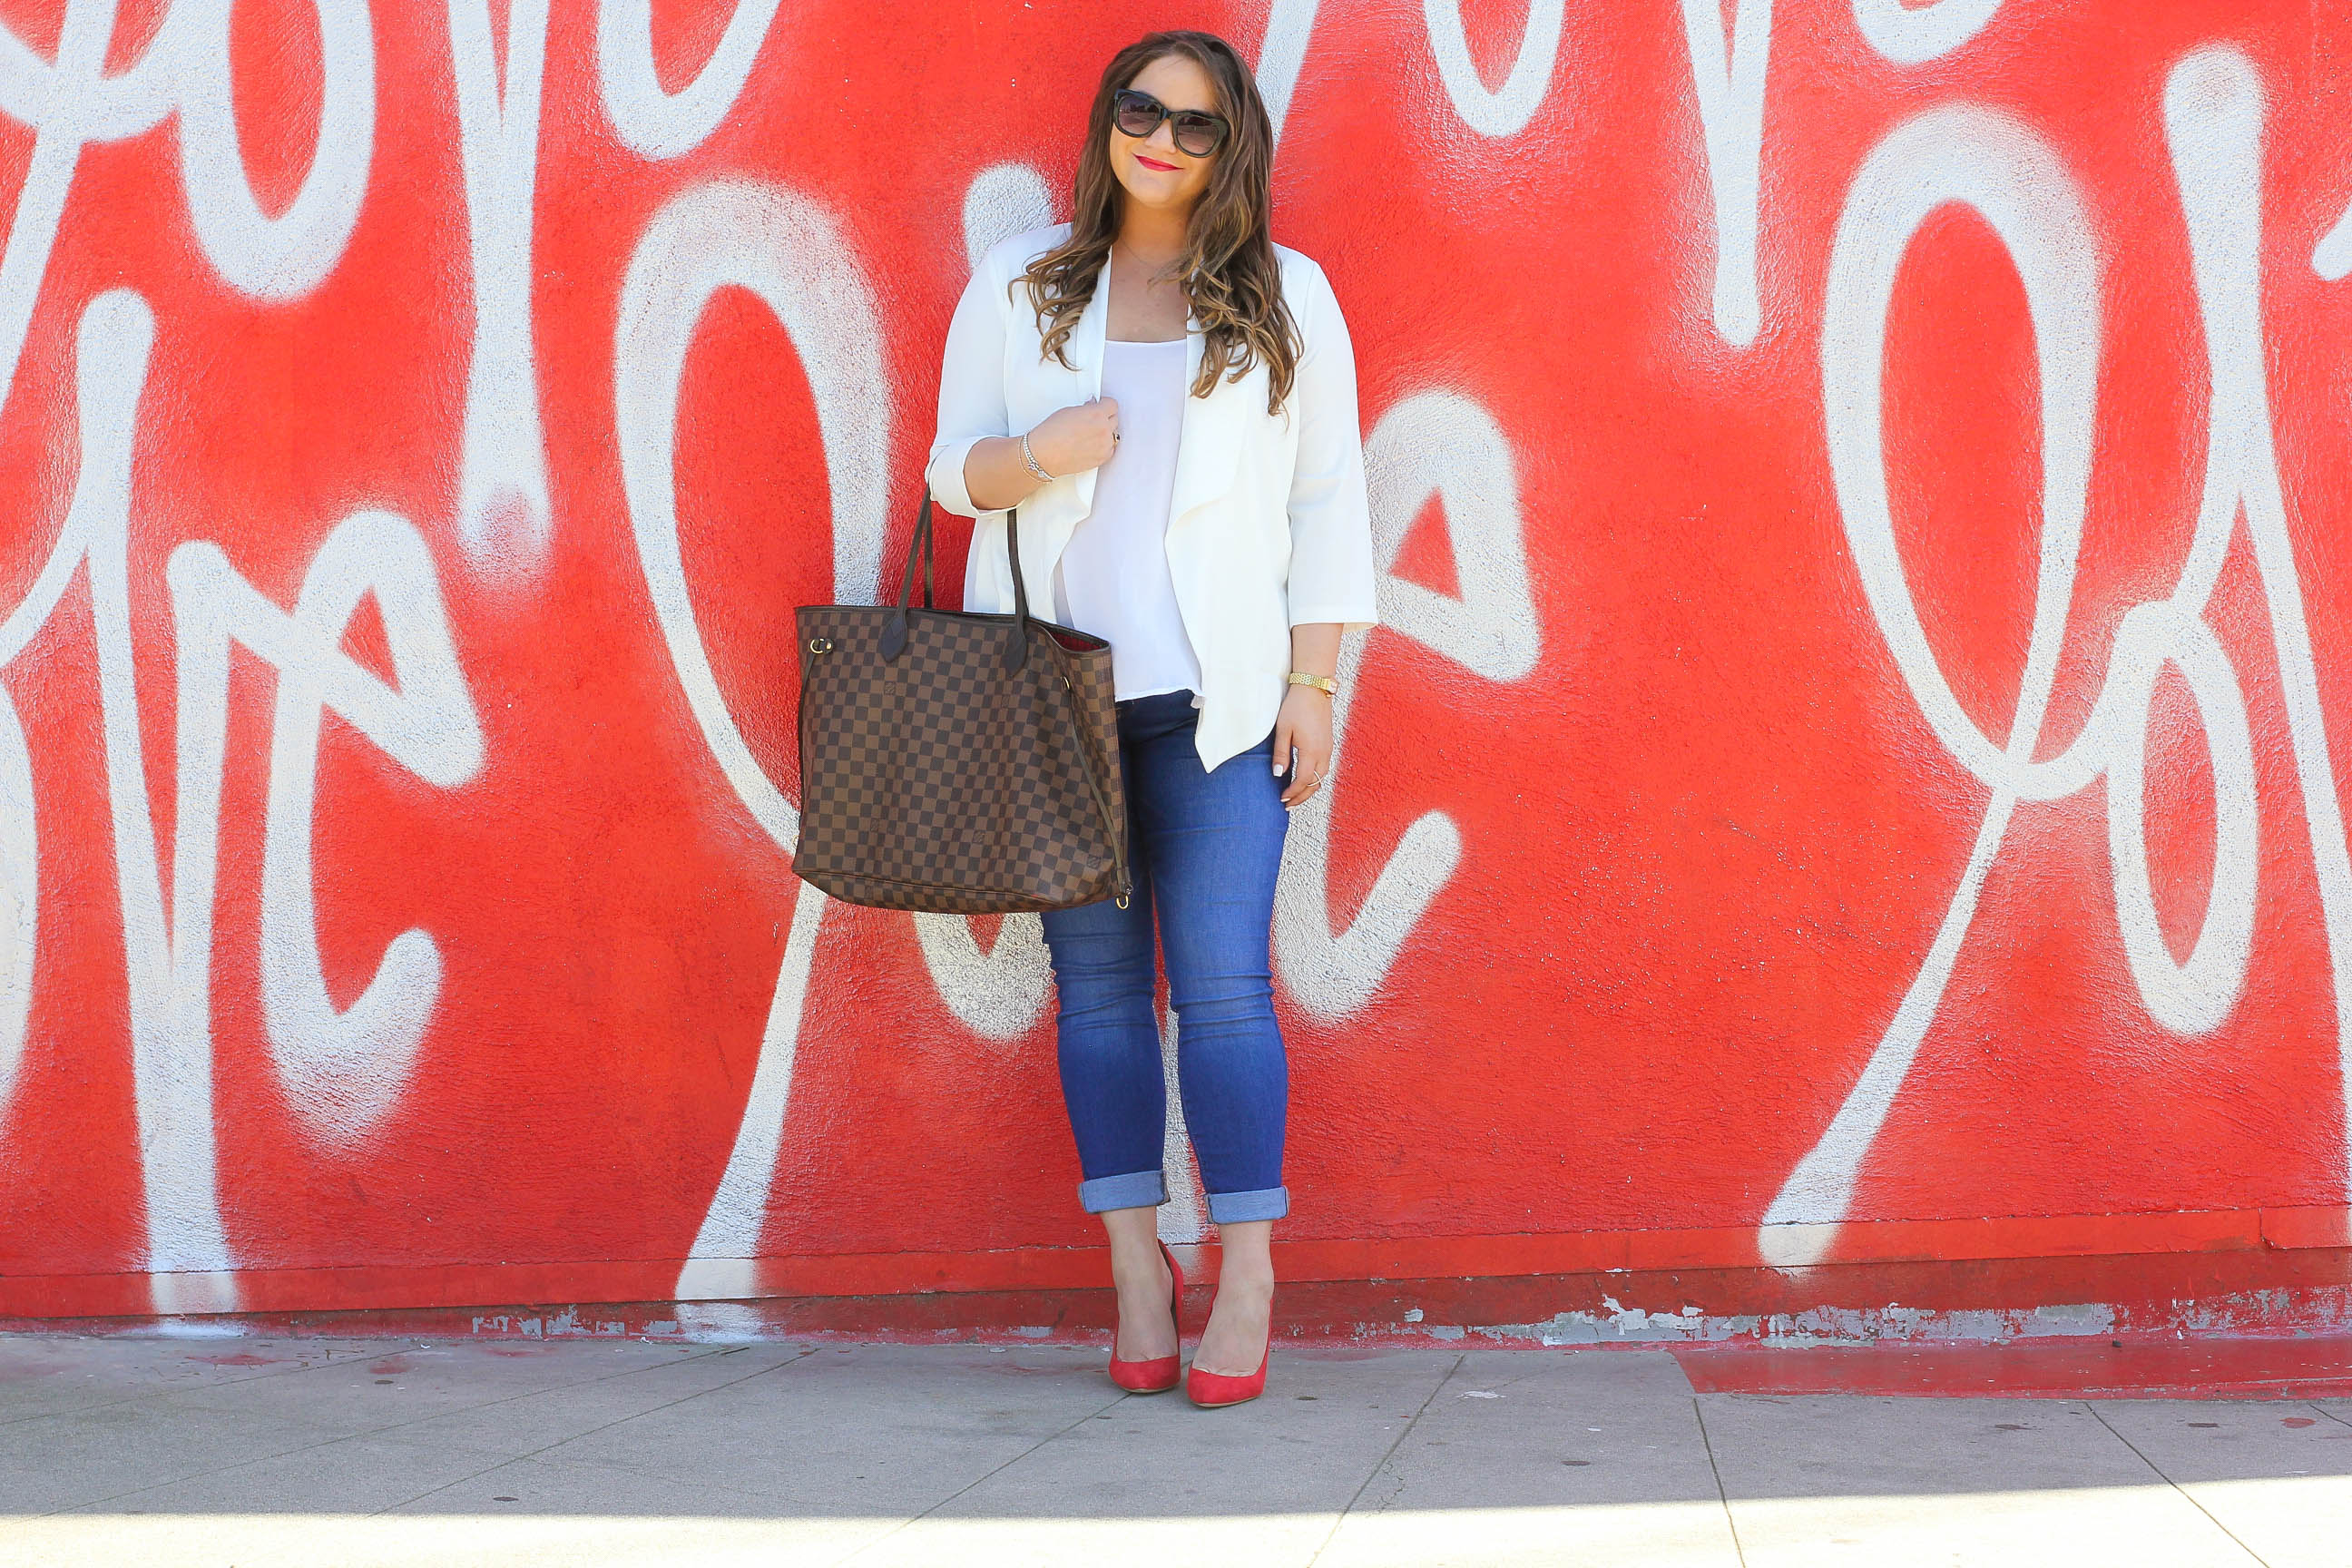 missyonmadison, missyonmadison blog, missyonmadison instagram, fashion blog, fashion blogger, melissa tierney, style blog, style blogger, style diaries, outfit inspo, ootd, bloglovin, outfit ideas, white boyfriend blazer, white chiffon camisole, old navy rockstar jeans, old navy skinny jeans, rockstar skinny jeans, red pumps, calvin klein red pumps, louis vuitton neverful tote, louis vuitton neverful, le specs sunglasses, black sunglasses, le specs black sunglasses, la style, la blogger, love wall, culver city love wall, culver city street art,